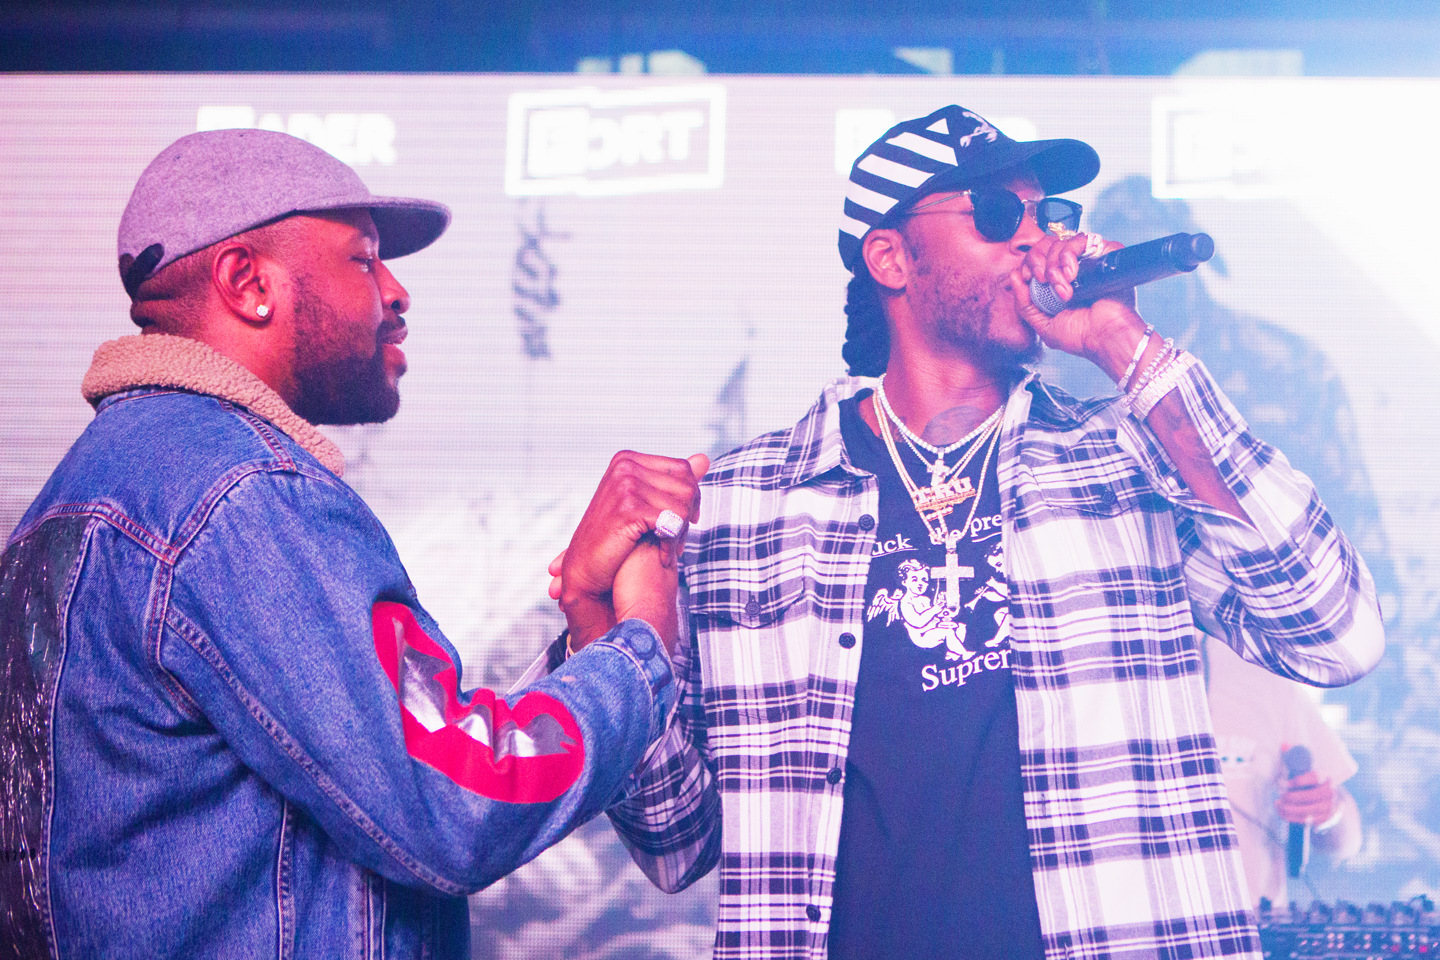 37 Amazing Photos From Saturday At The FADER FORT